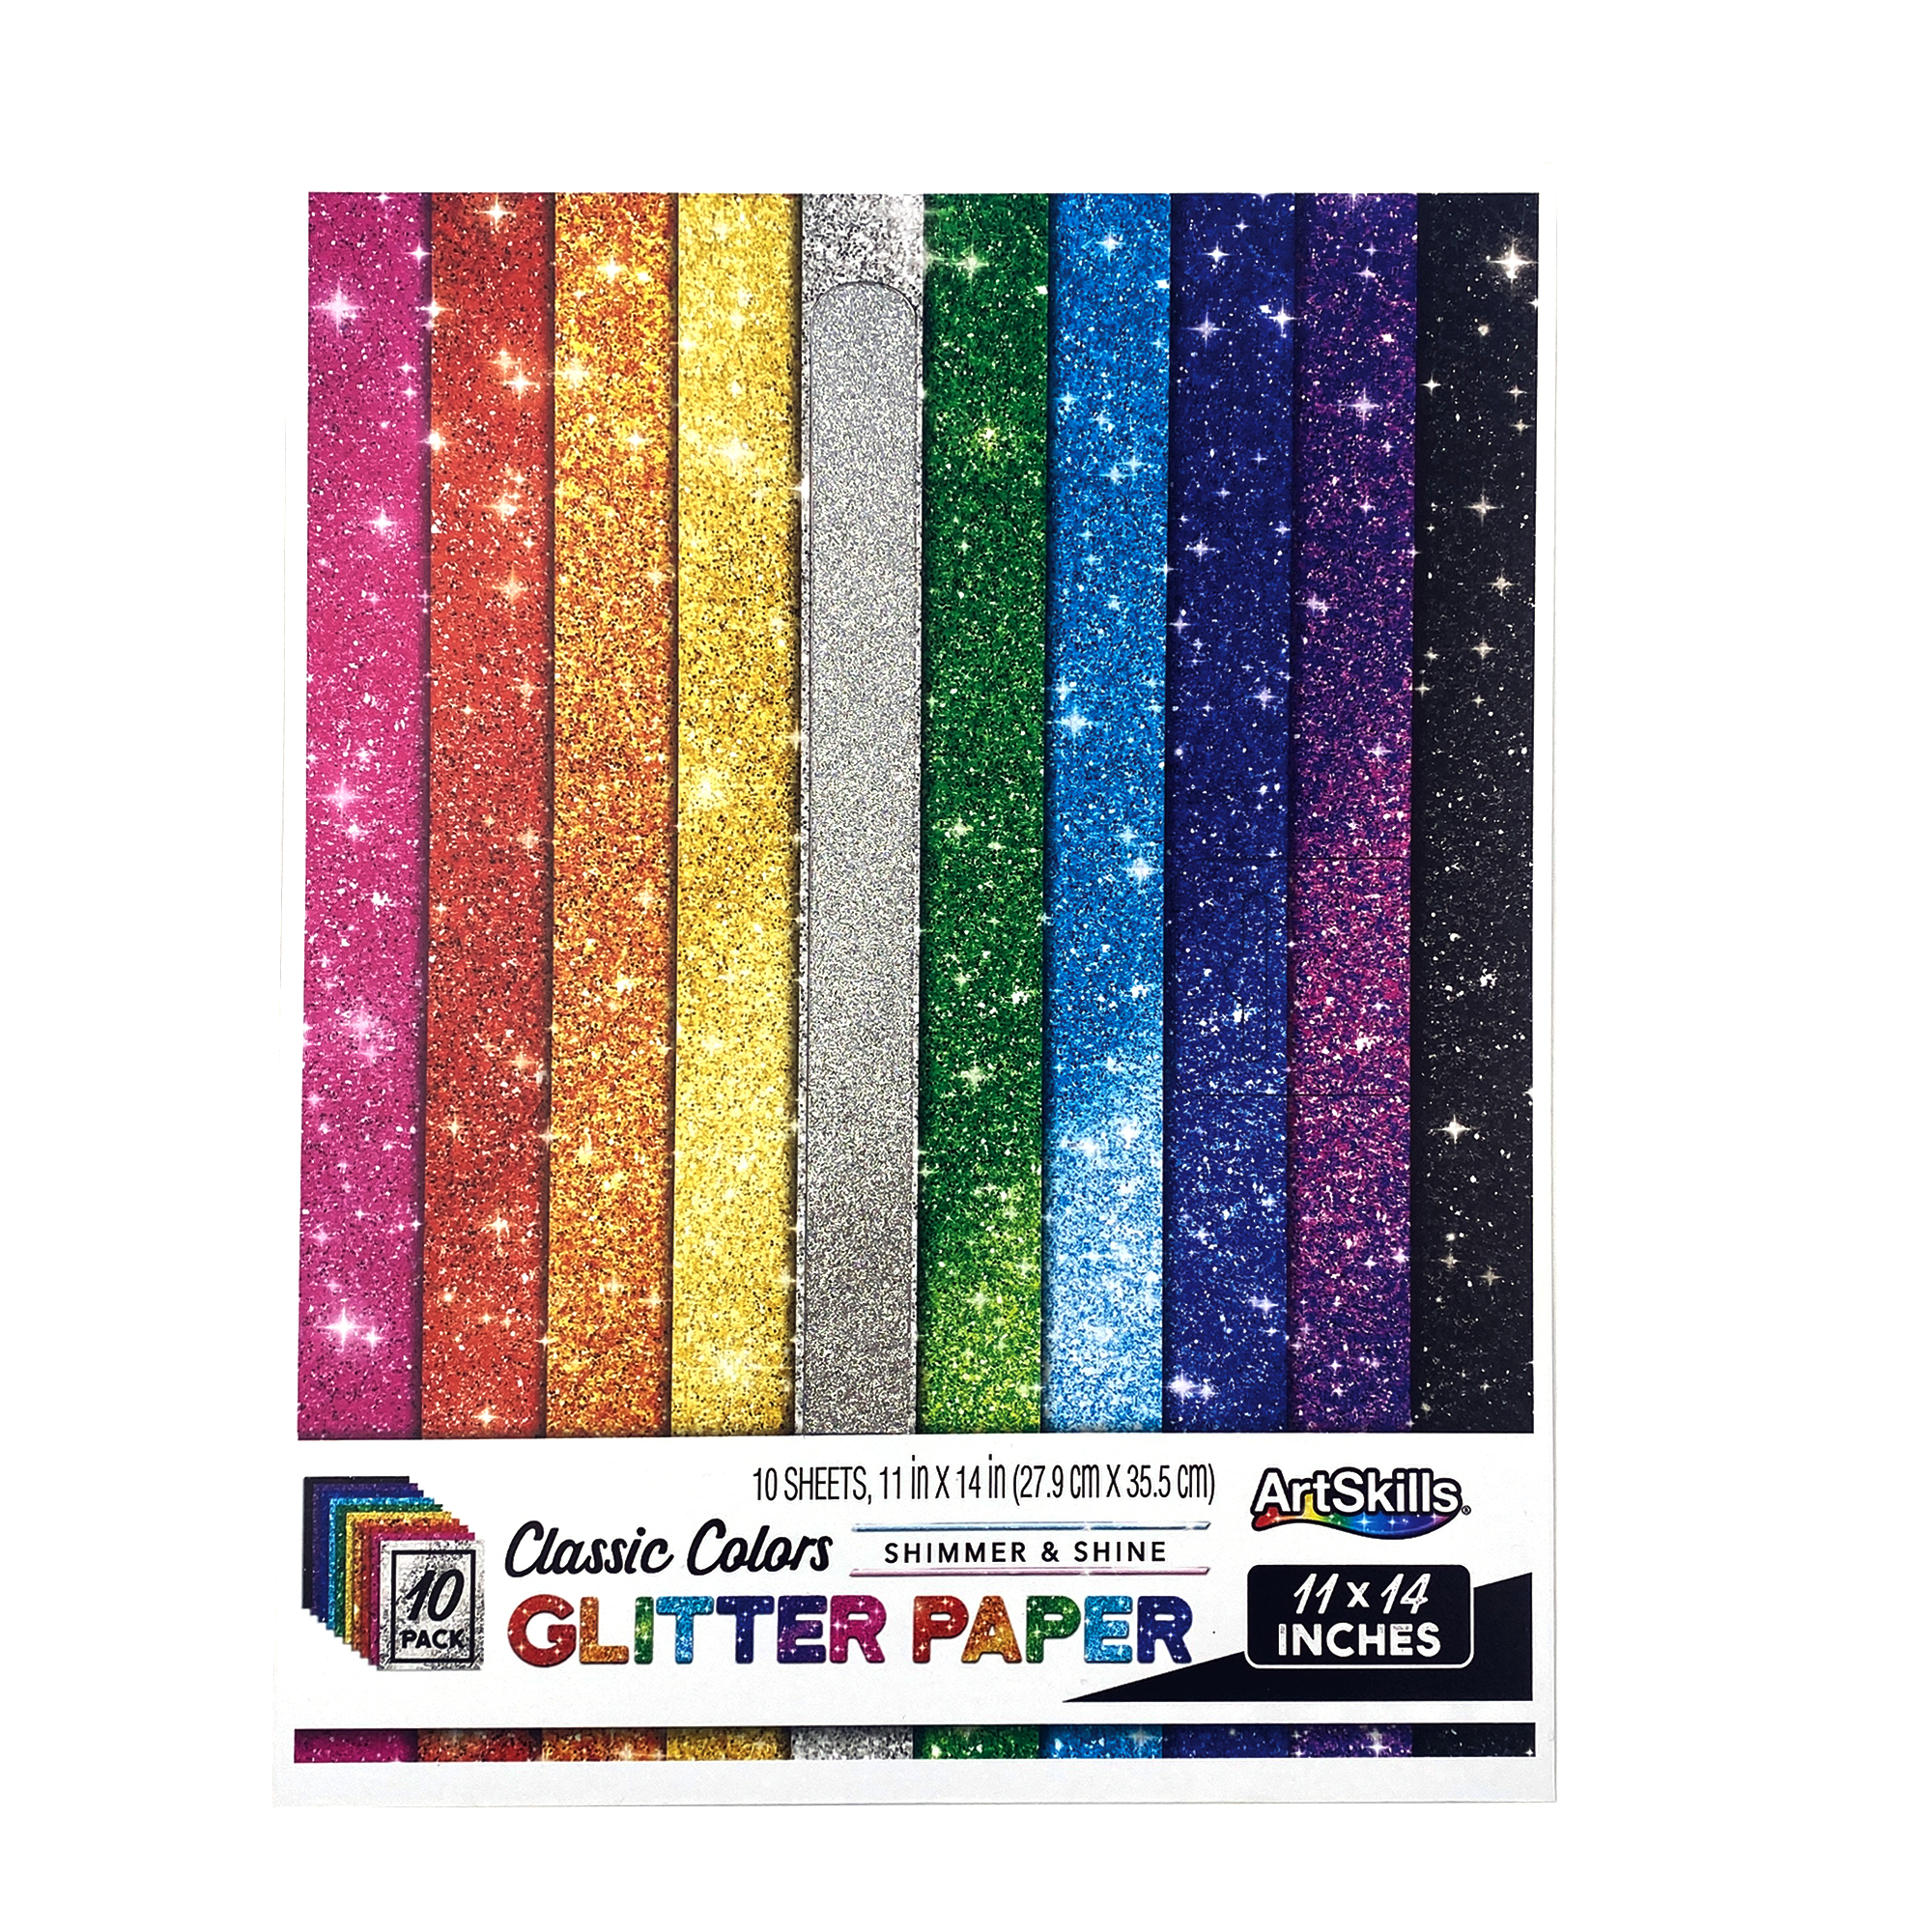 ArtSkills Glitter Paper for Arts and Crafts, Scrapbooking, 11" x 14", Assorted, 10 Pcs - image 1 of 6